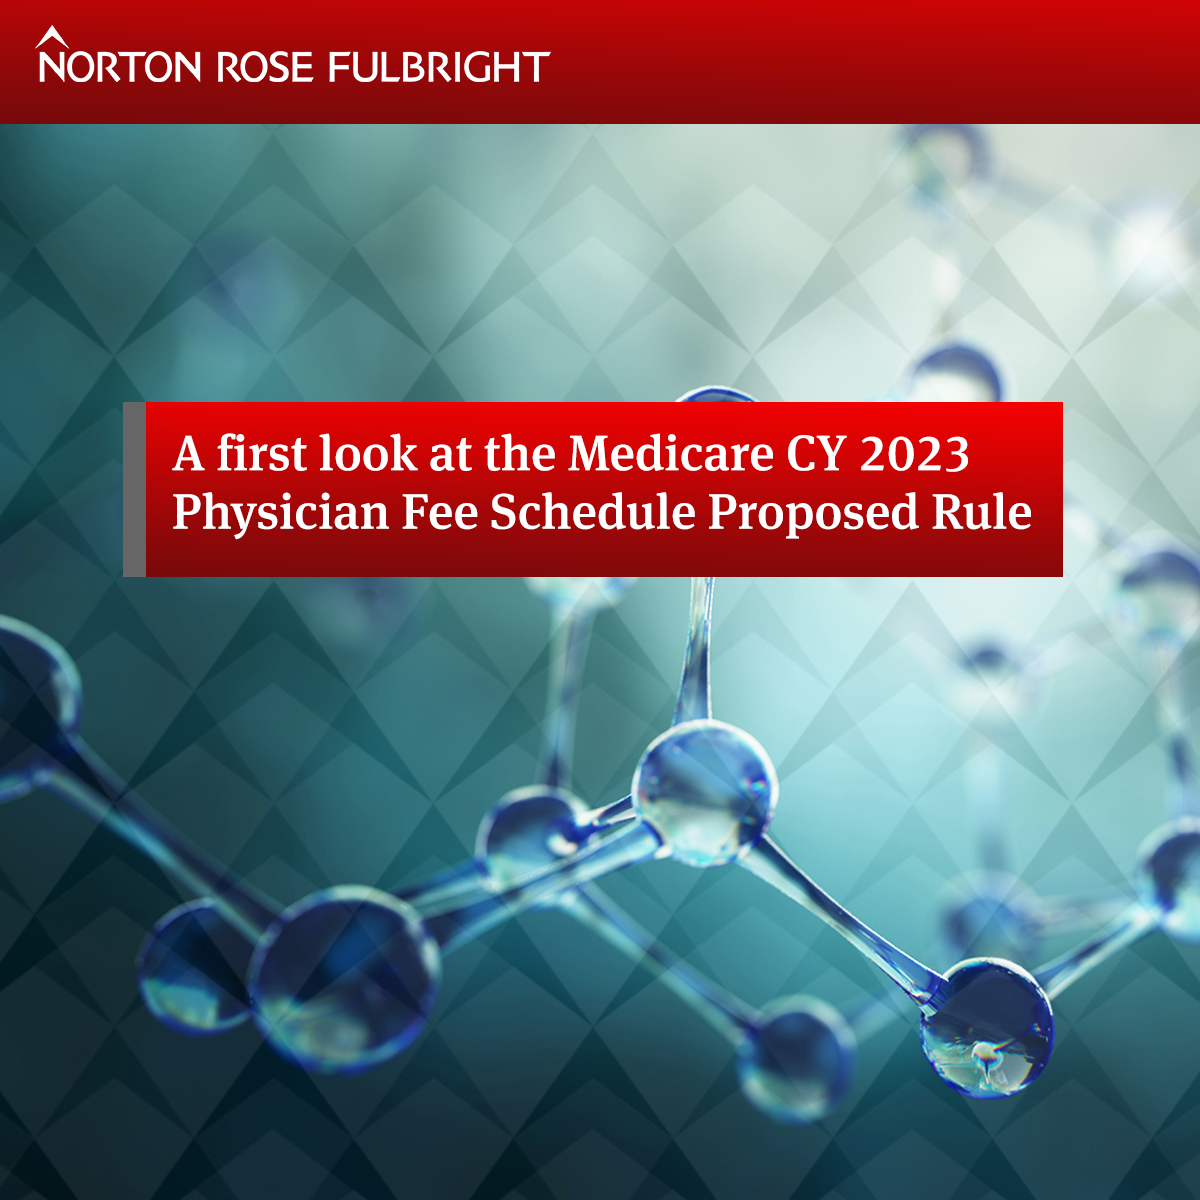 A first look at the Medicare CY 2023 Physician Fee Schedule Proposed